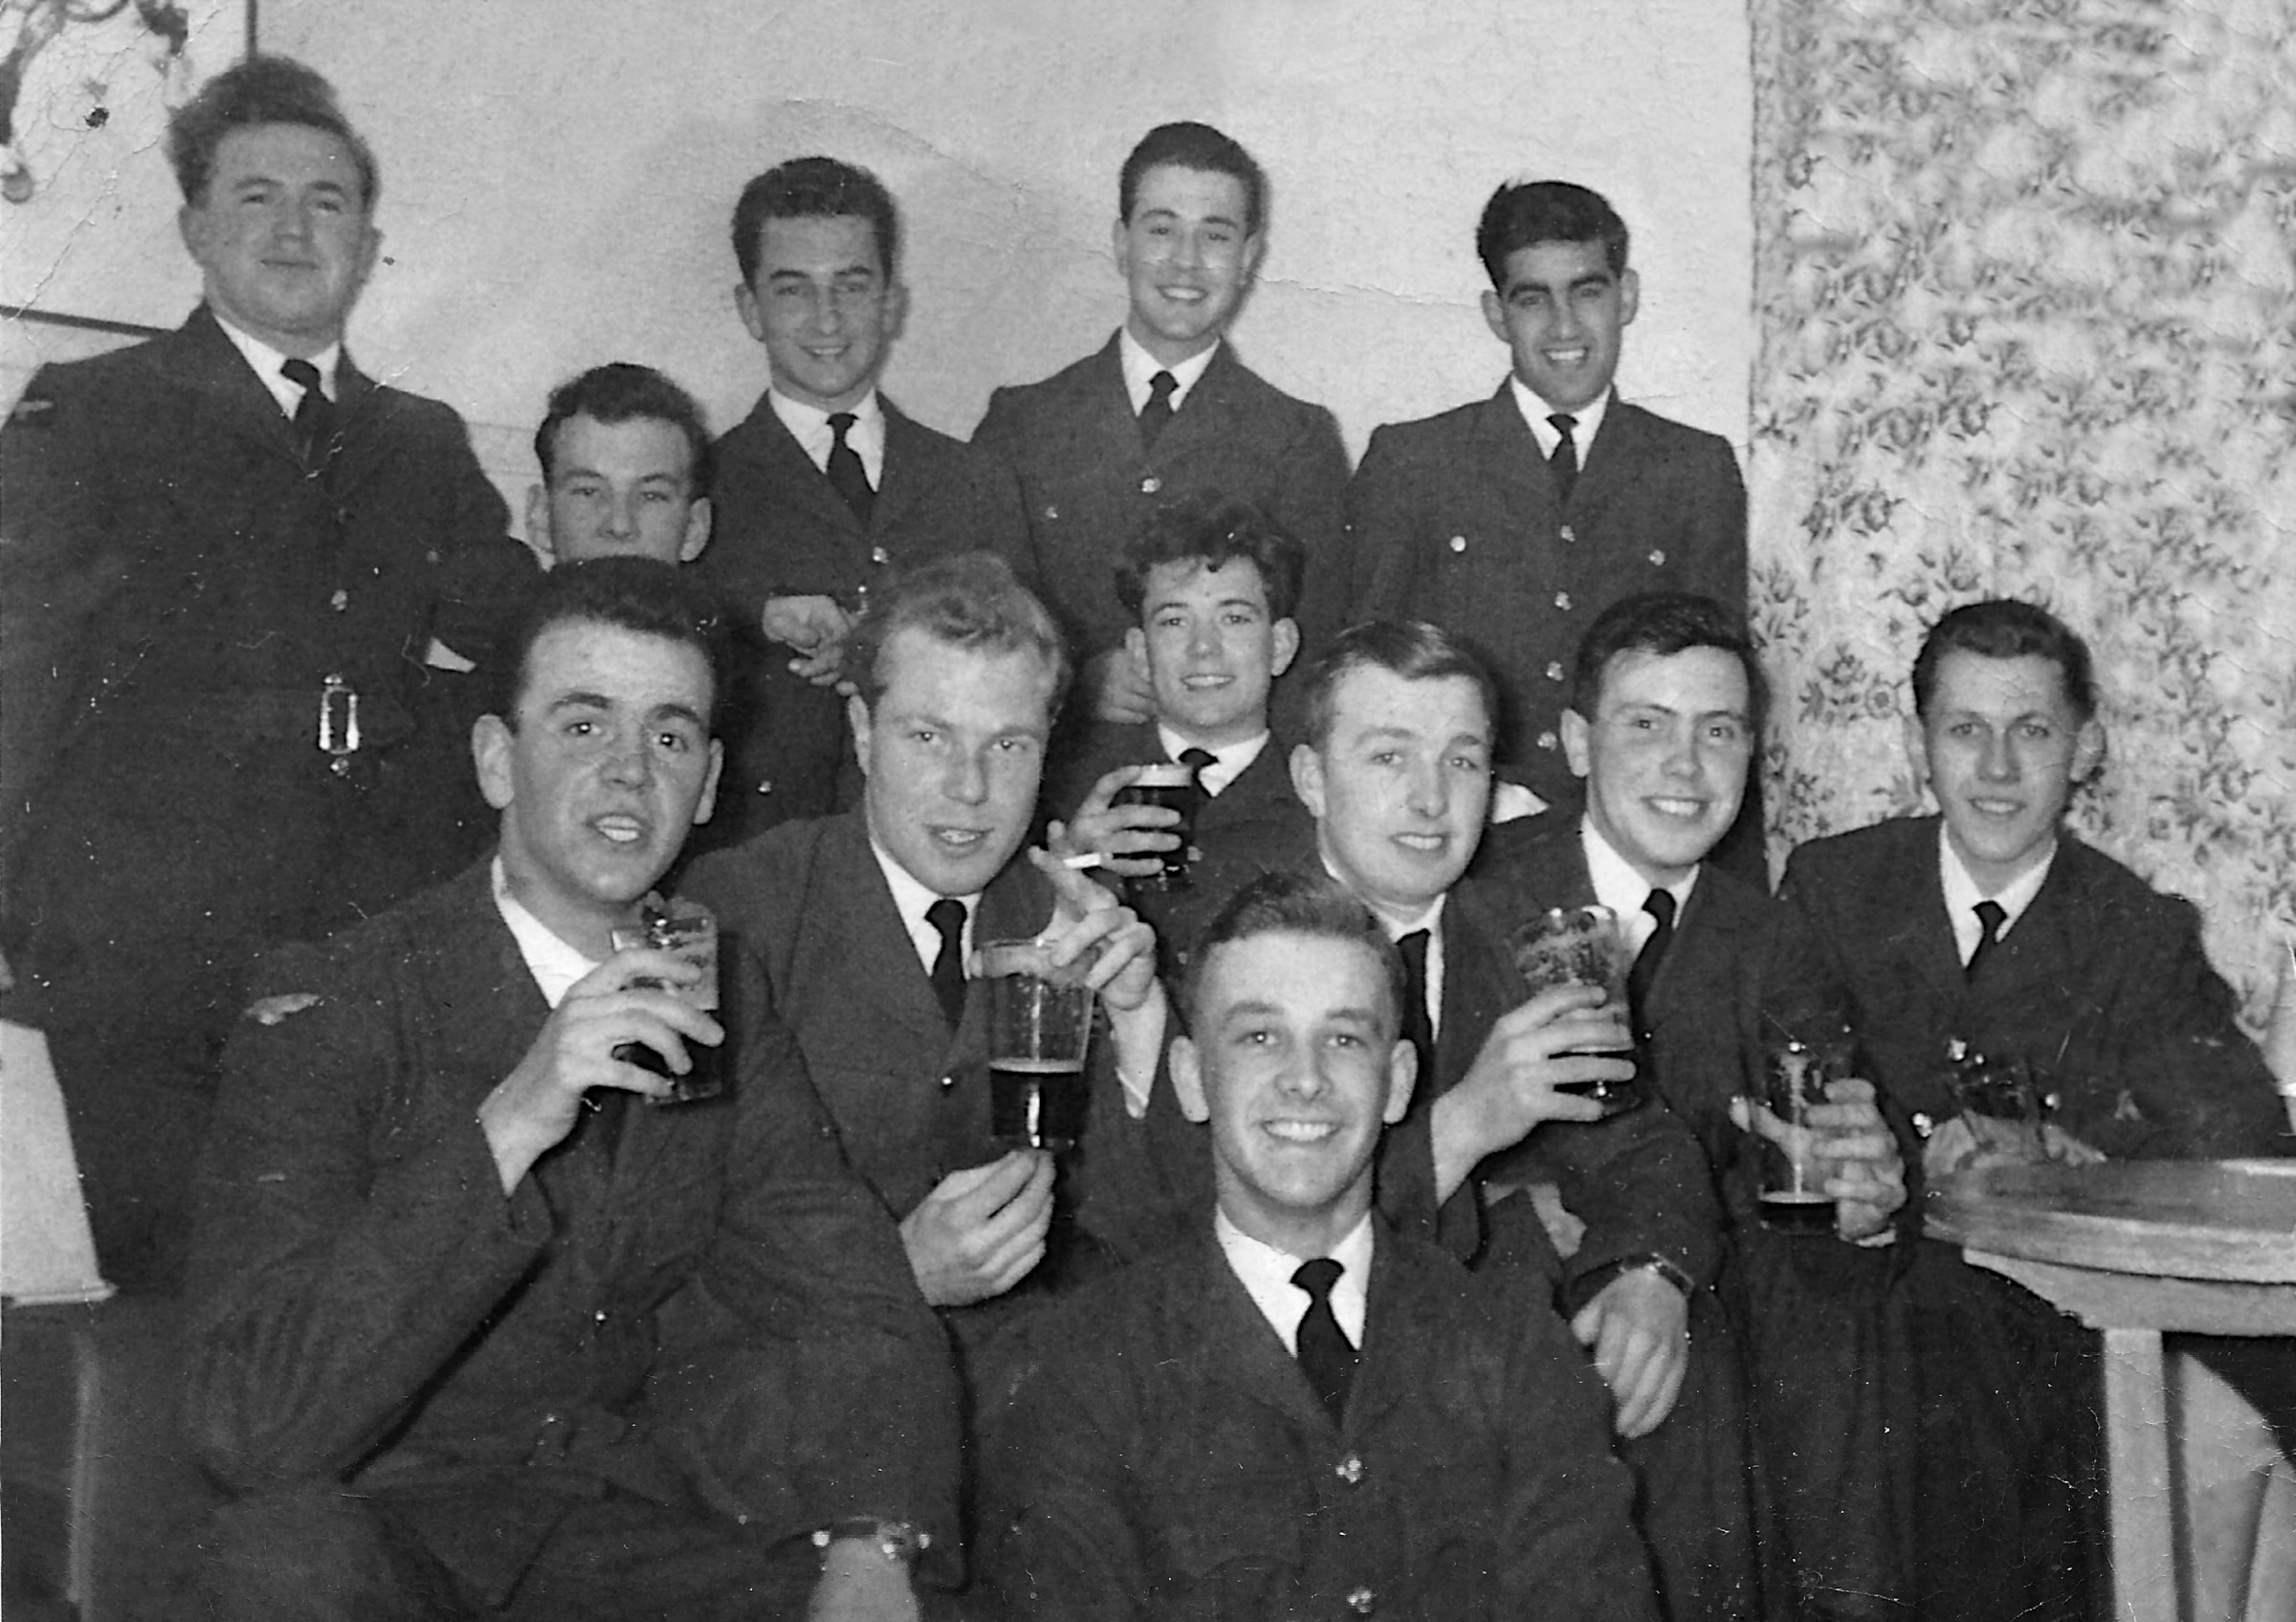 Trevor (with cigarette), and the lads from the 69th enjoy a pint, 1954(?)